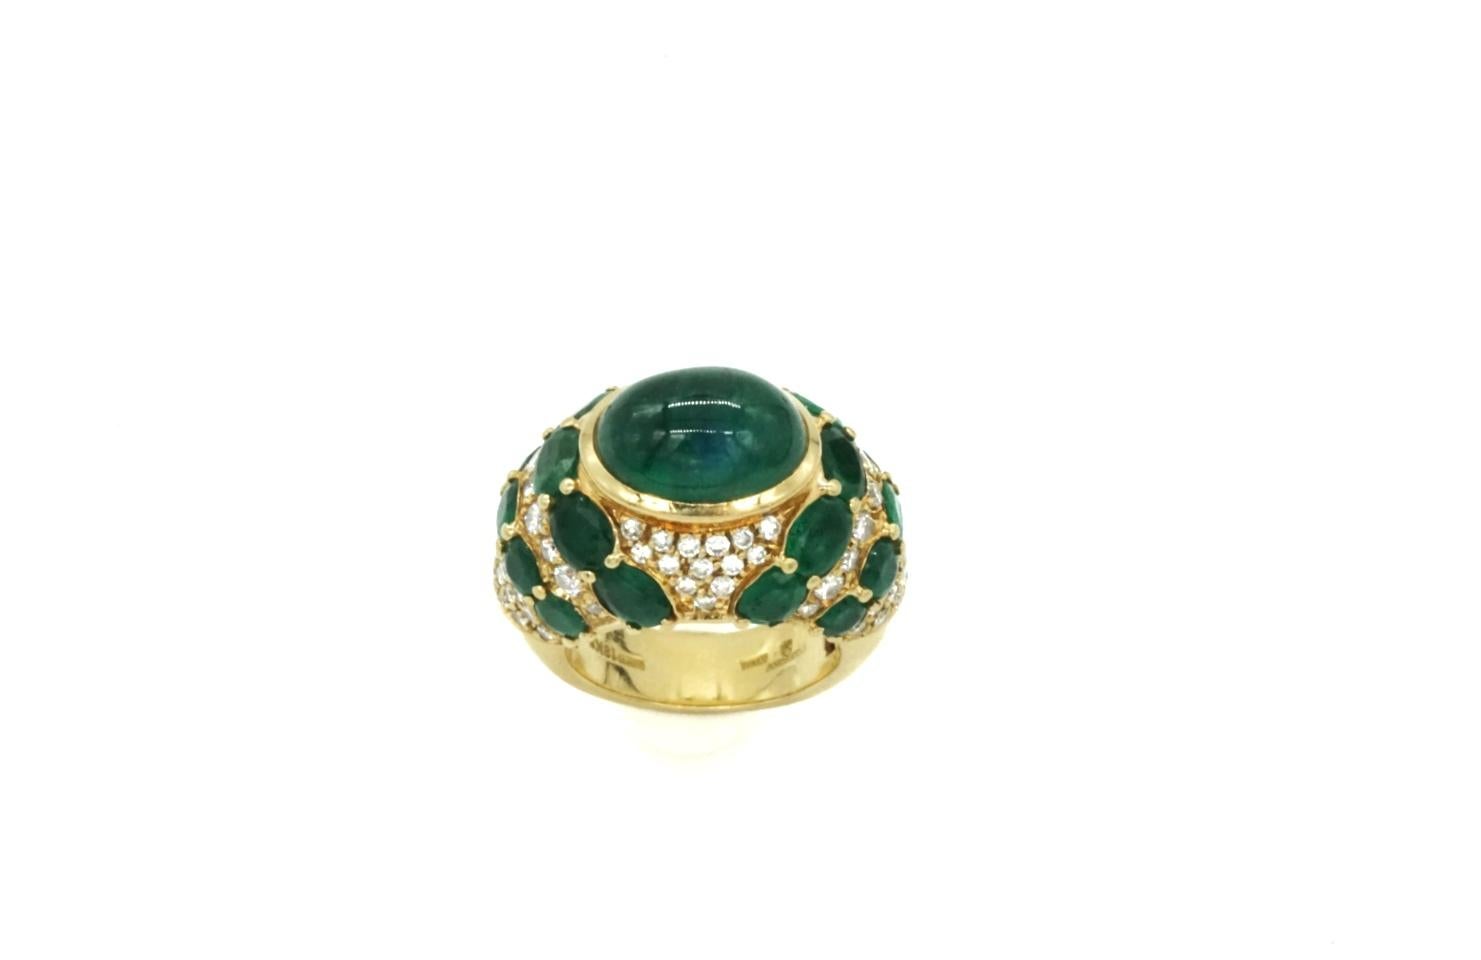 An Emerald and diamond bombe cocktail ring by Andreoli in 18k yellow gold. Made in Italy, circa 1970. The main cabochon emerald is approximately 5-6 carats. And the surrounding emeralds total approximately 4-5 carats. The diamonds total